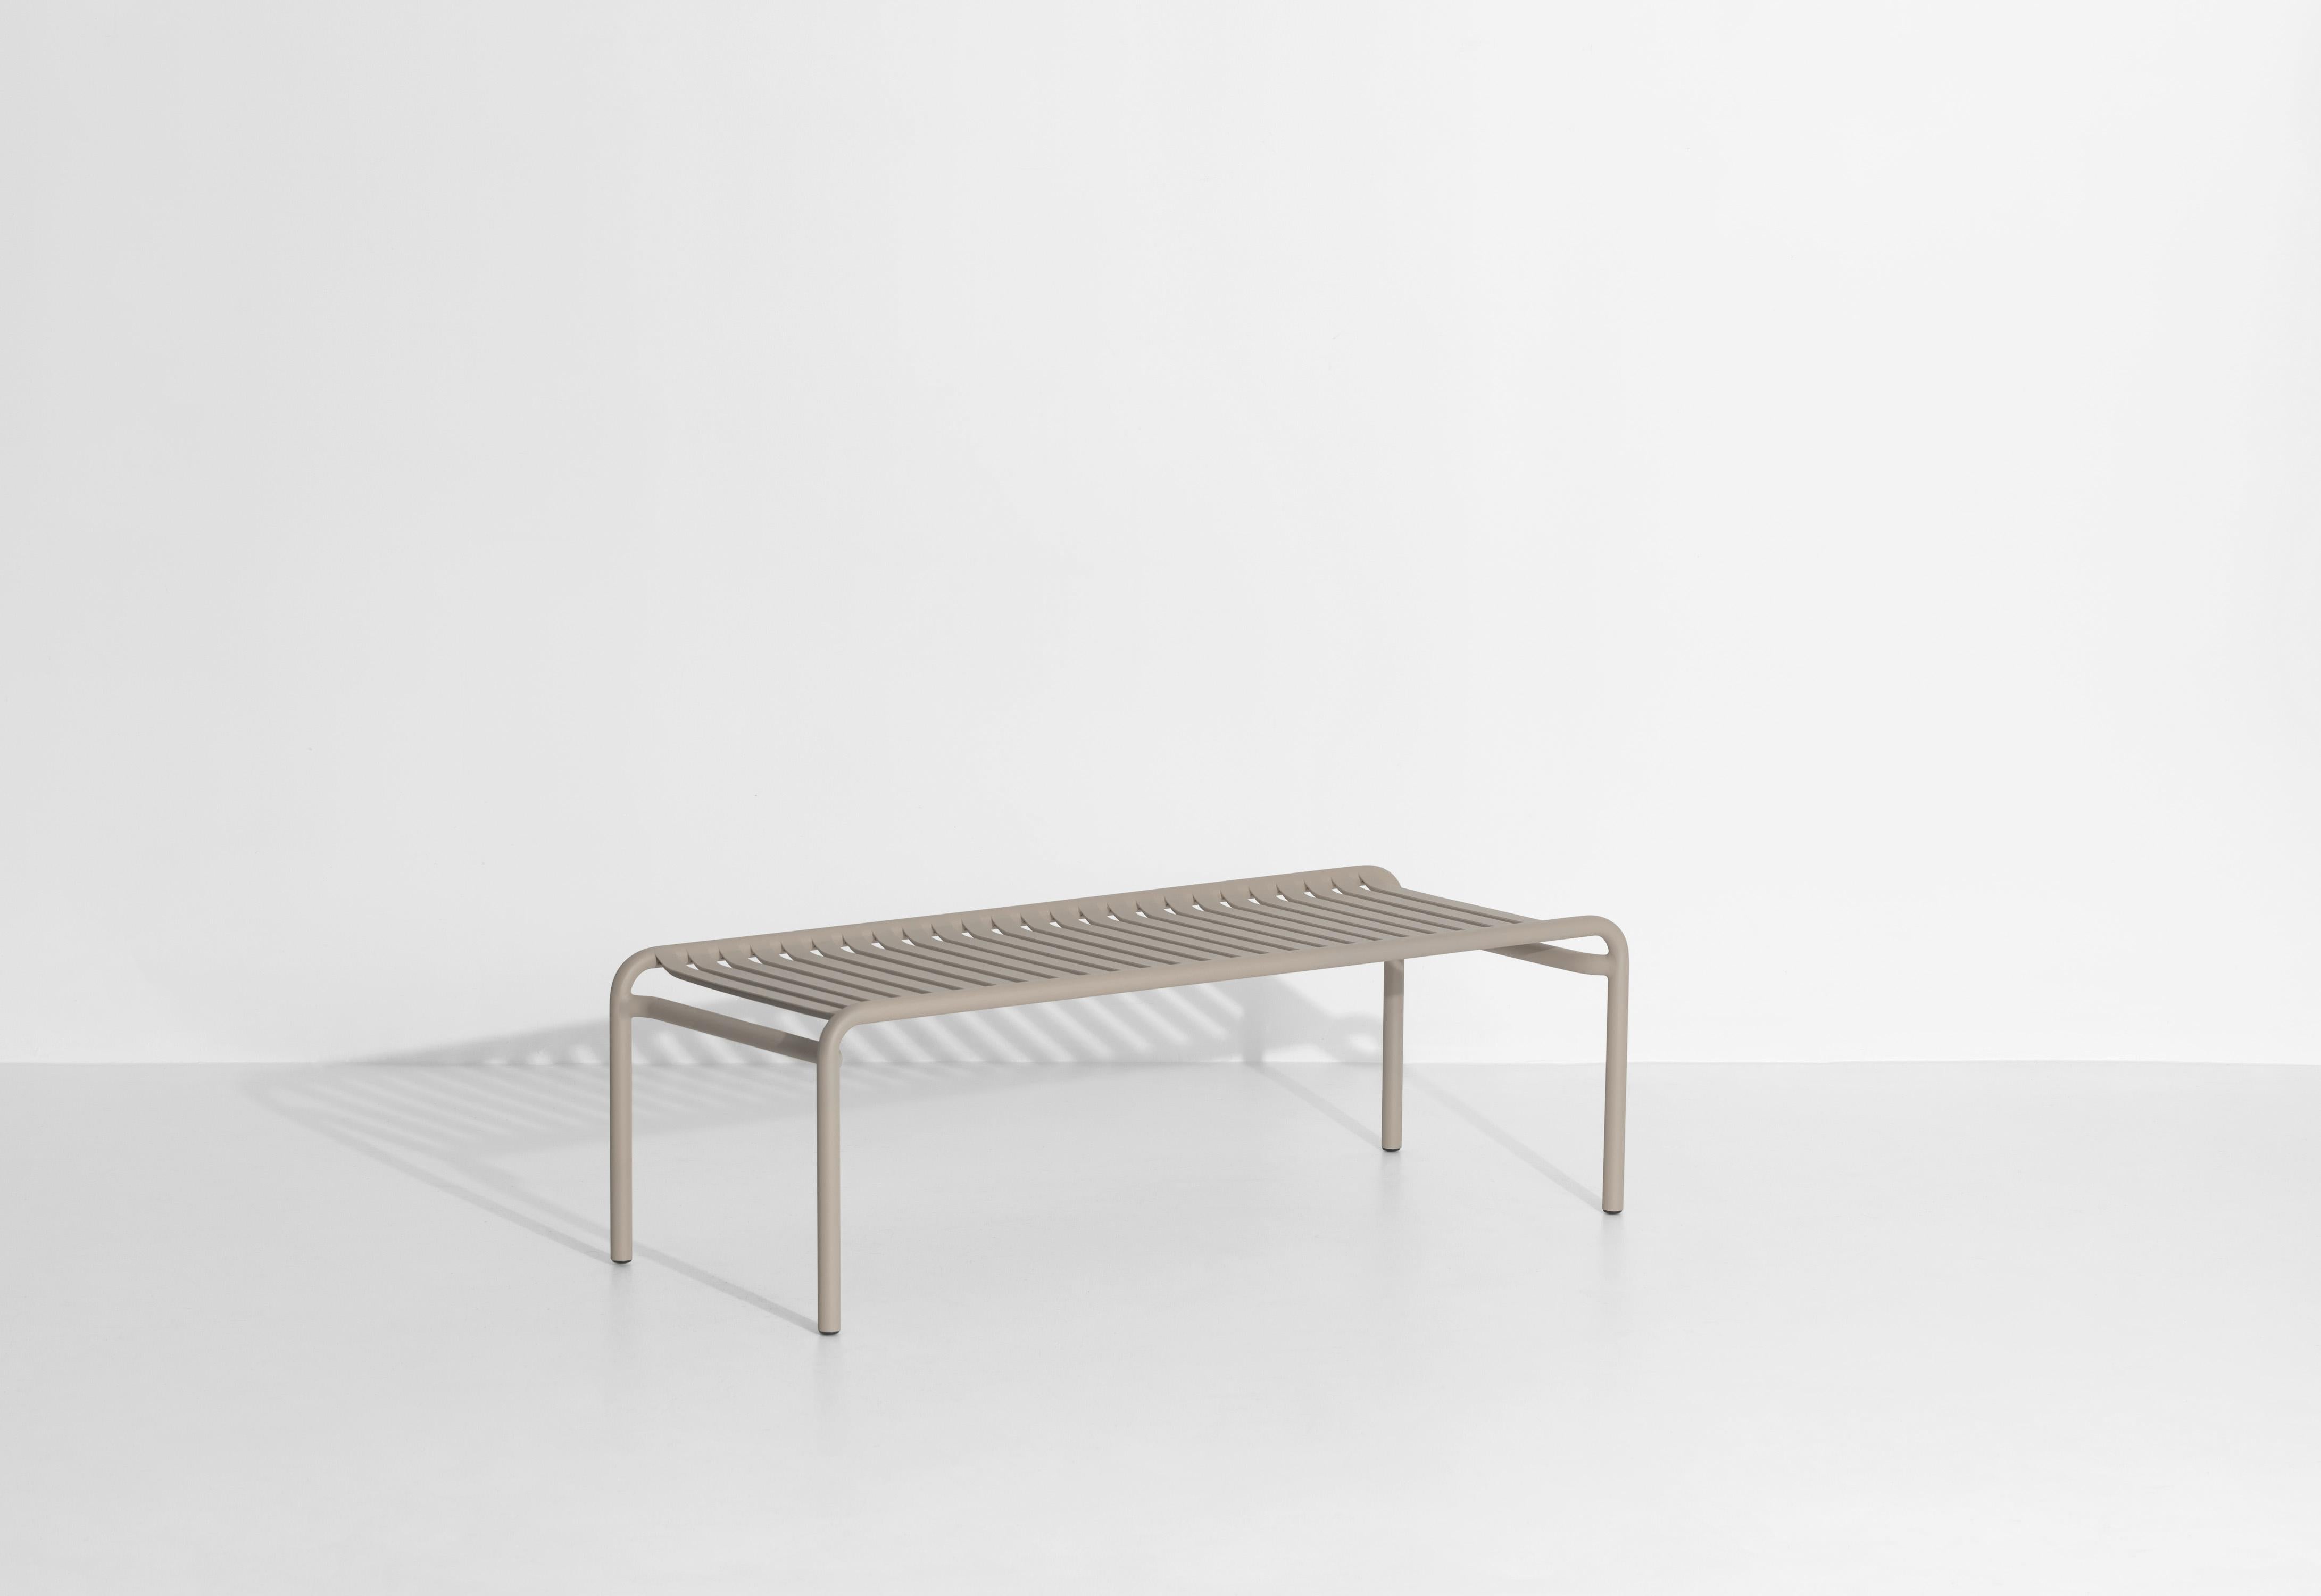 Petite Friture Week-End Long Coffee Table in Dune Aluminium, 2017 In New Condition For Sale In Brooklyn, NY